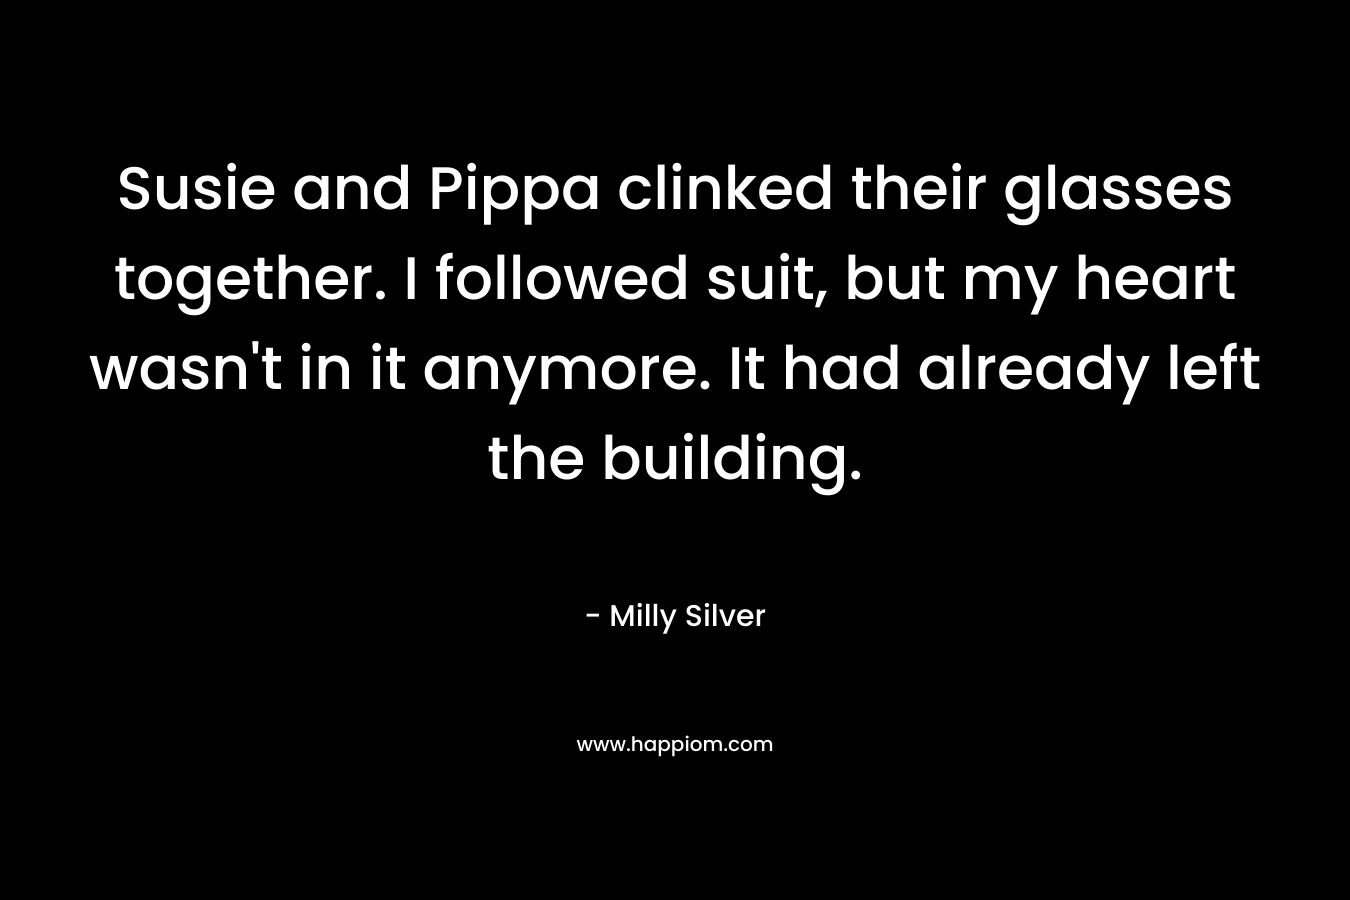 Susie and Pippa clinked their glasses together. I followed suit, but my heart wasn’t in it anymore. It had already left the building. – Milly Silver